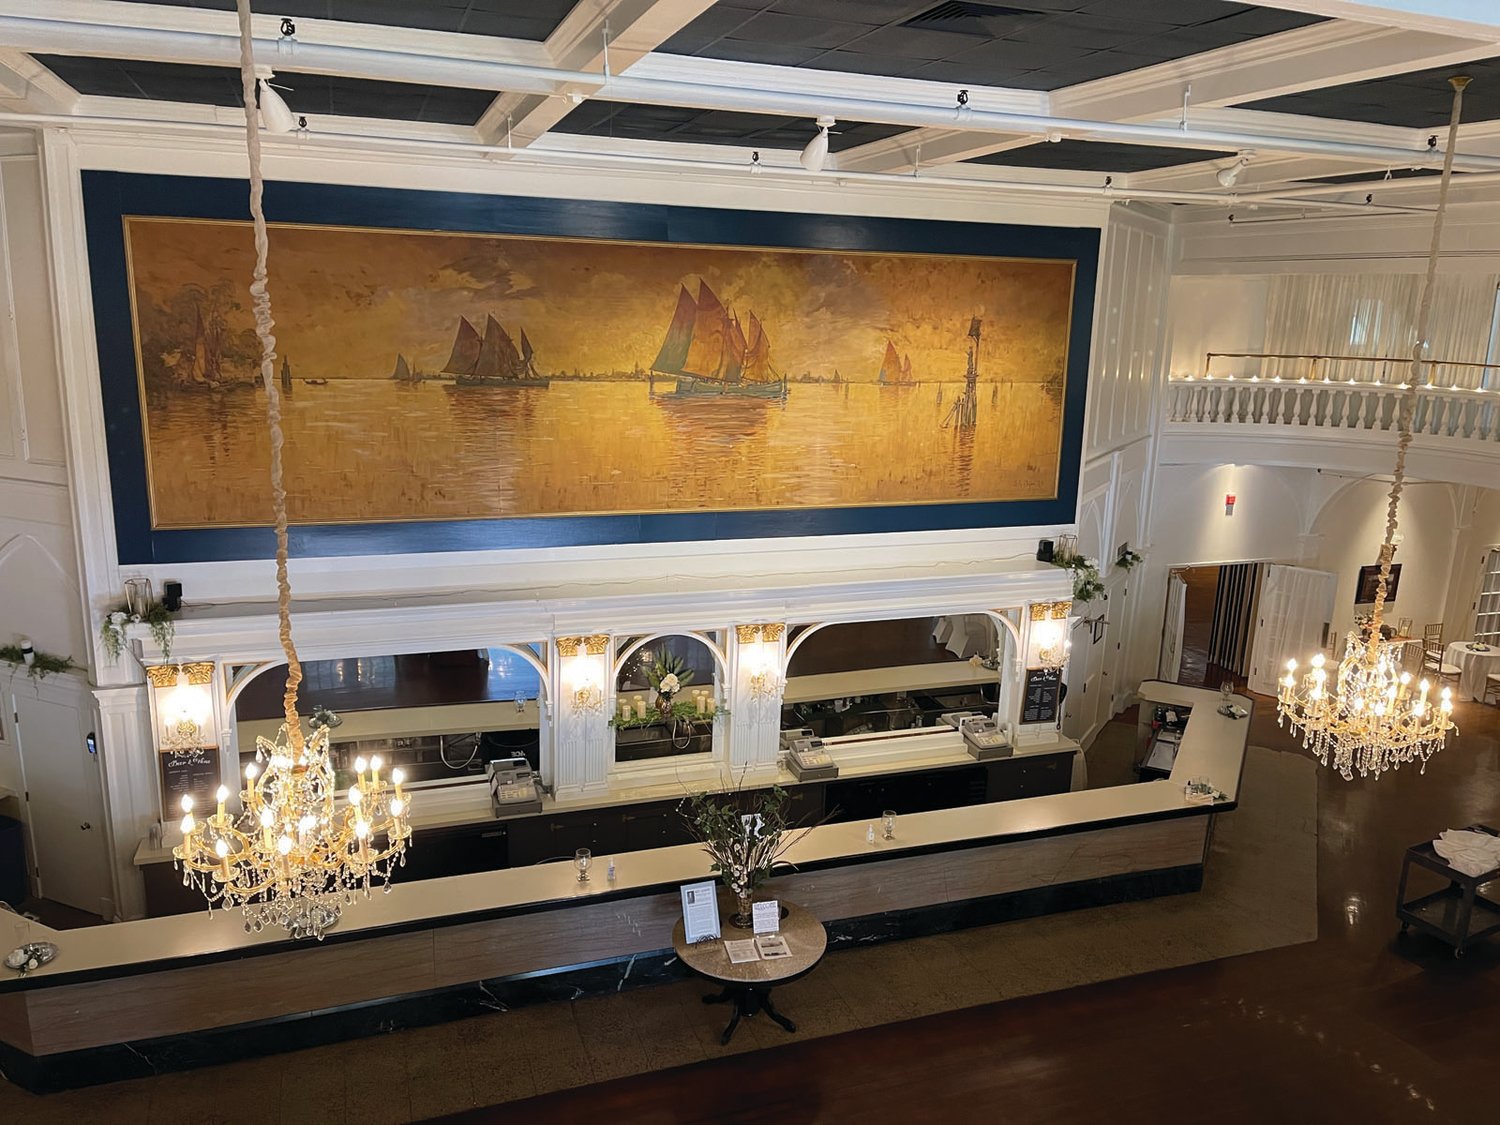 FAMILIAR SIGHT: “The Mural of Narragansett Bay” by Hezekiah A. Dyer, which adorns the wall above the bar outside the Rhodes on the Pawtuxet Ballroom, has been restored as part of the broader revitalization effort.